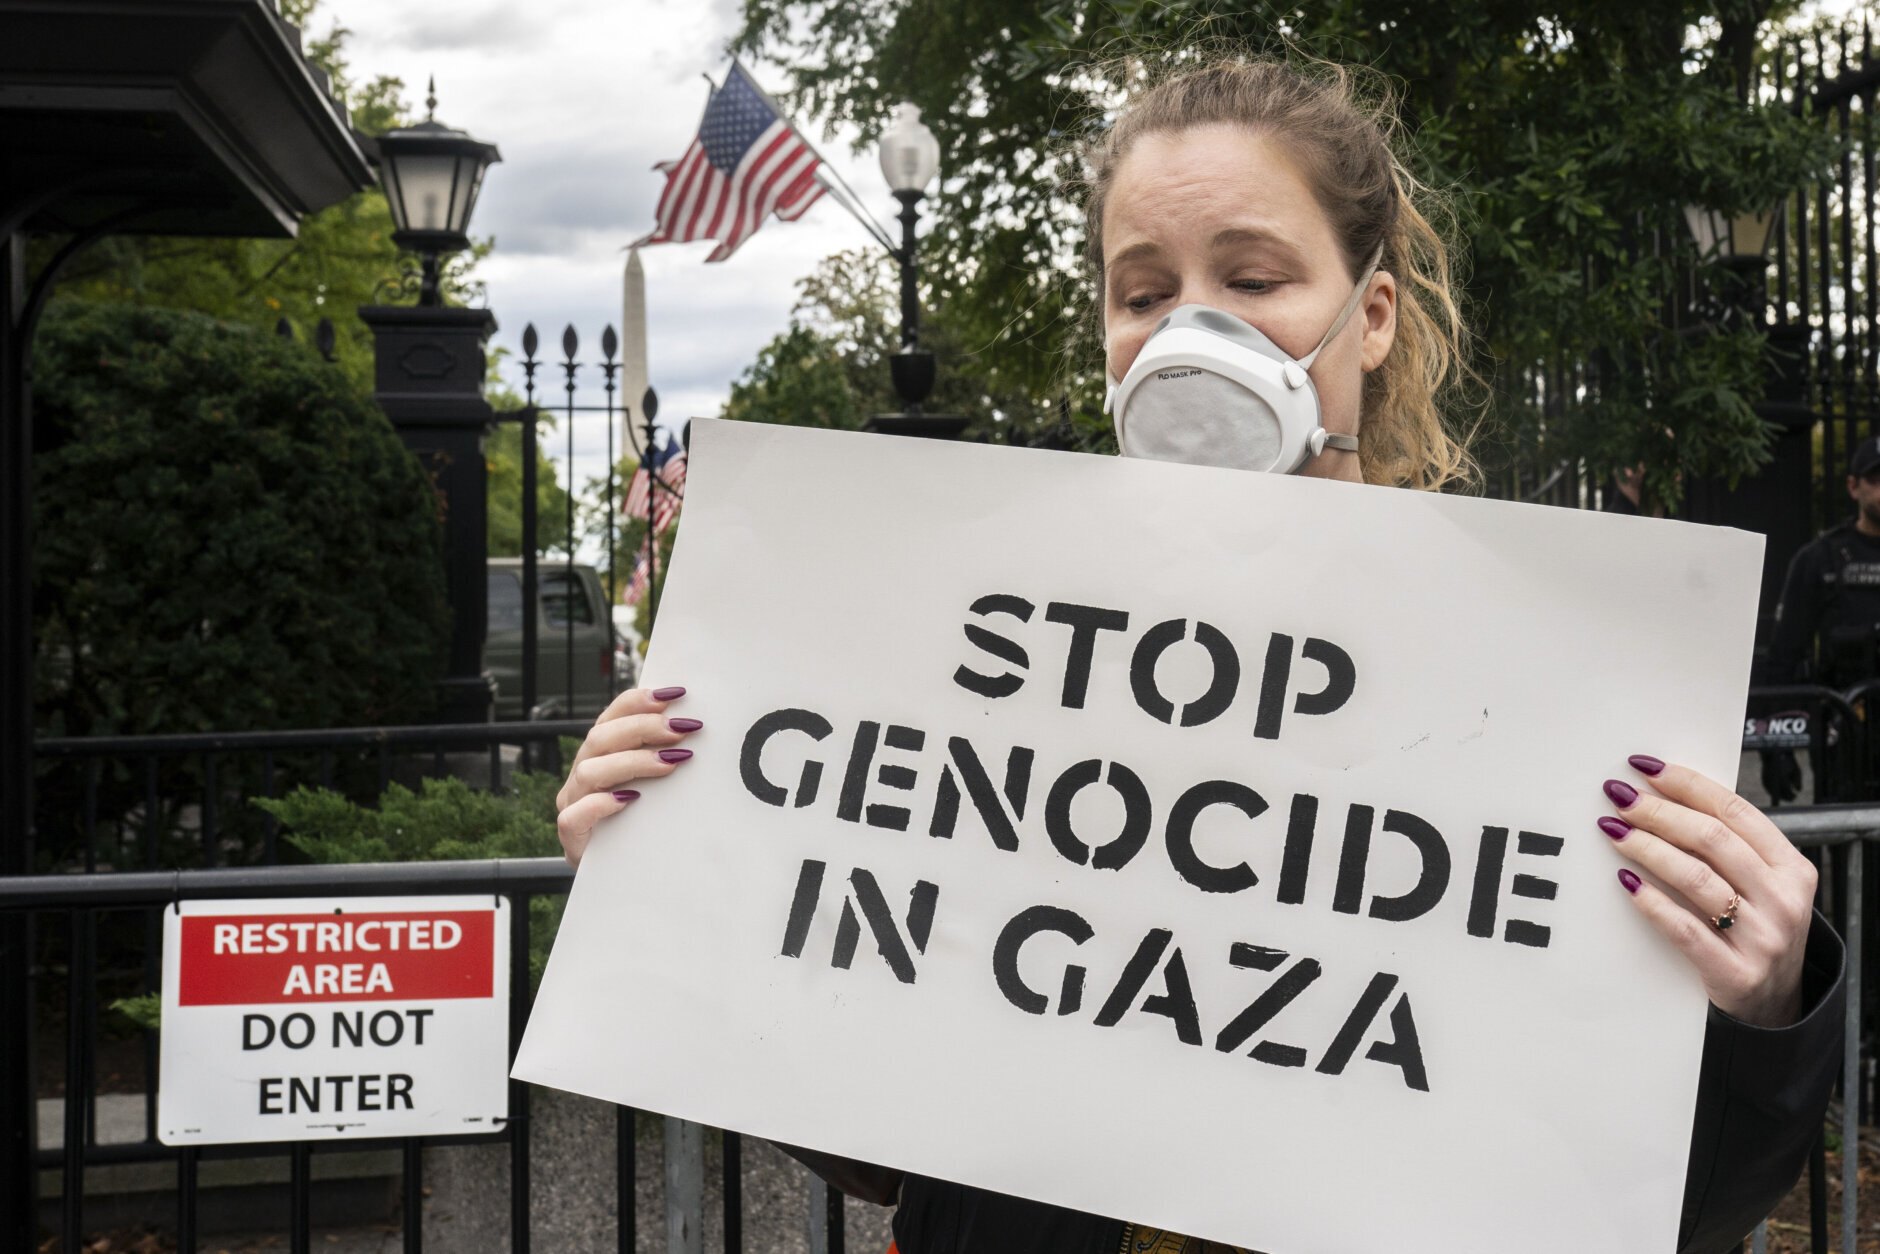 With the Washington Monument in the background, a protester blocks an entrance to the White House during a demonstration calling for a ceasefire in Gaza in Washington, Monday, Oct. 16, 2023. (AP Photo/Nathan Howard)